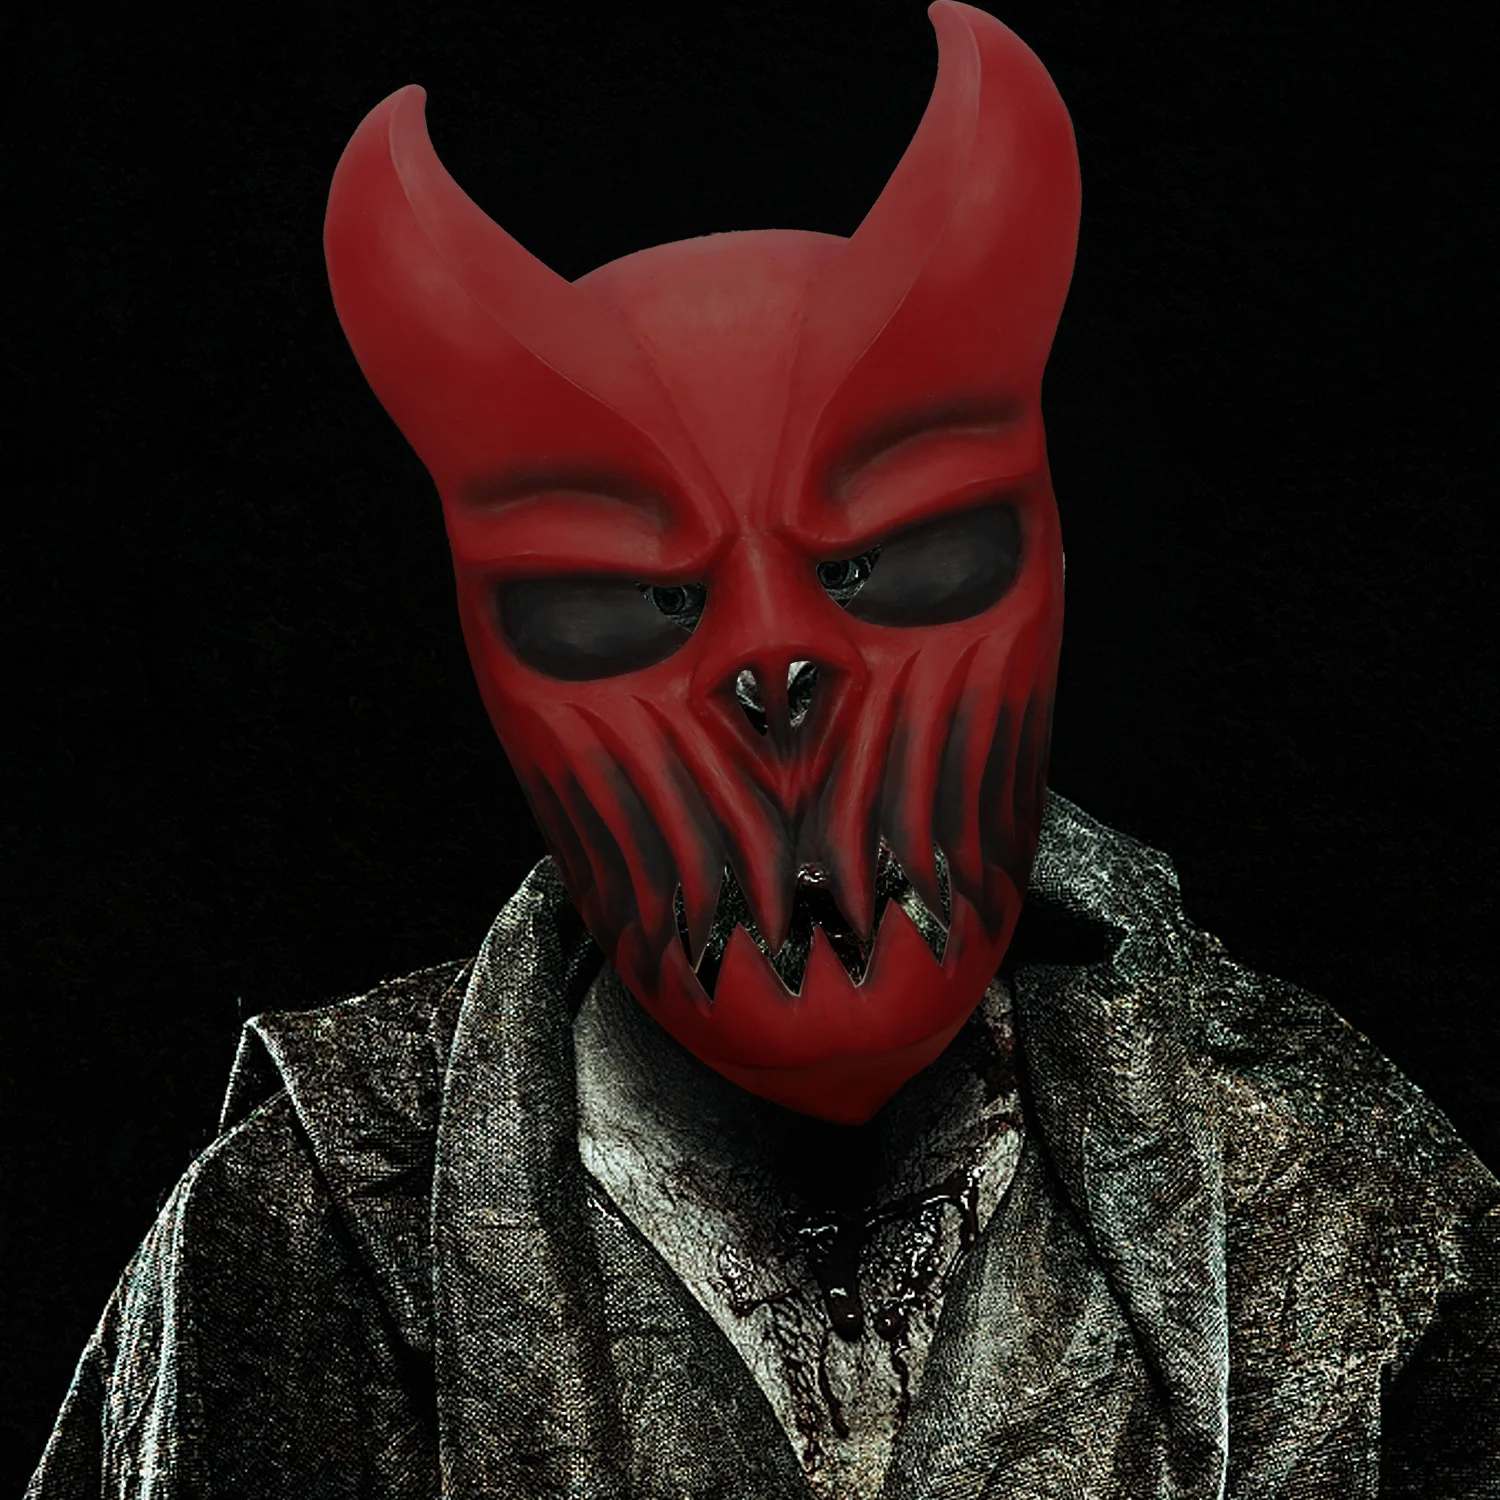 

Devil Ghost Mask Halloween Death Core Band Headwear Dress Up Party Haunted House Secret Room Death Props